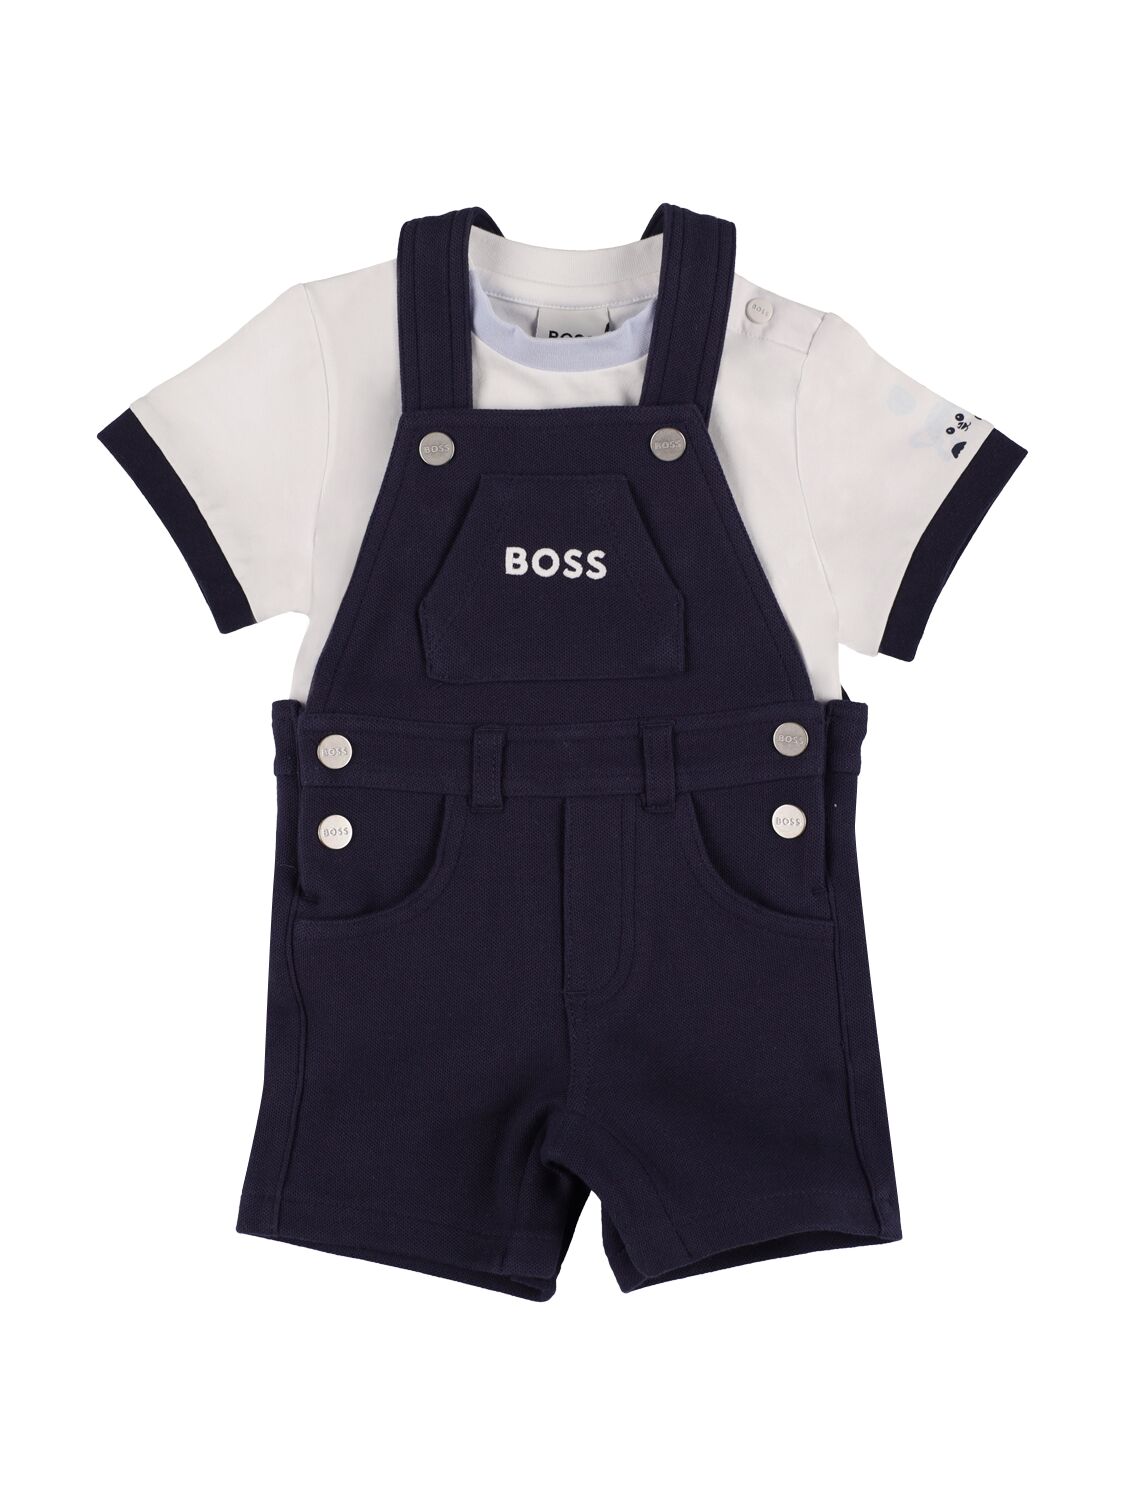 Hugo Boss Babies' Cotton Jersey T-shirt & Overalls In Navy,white